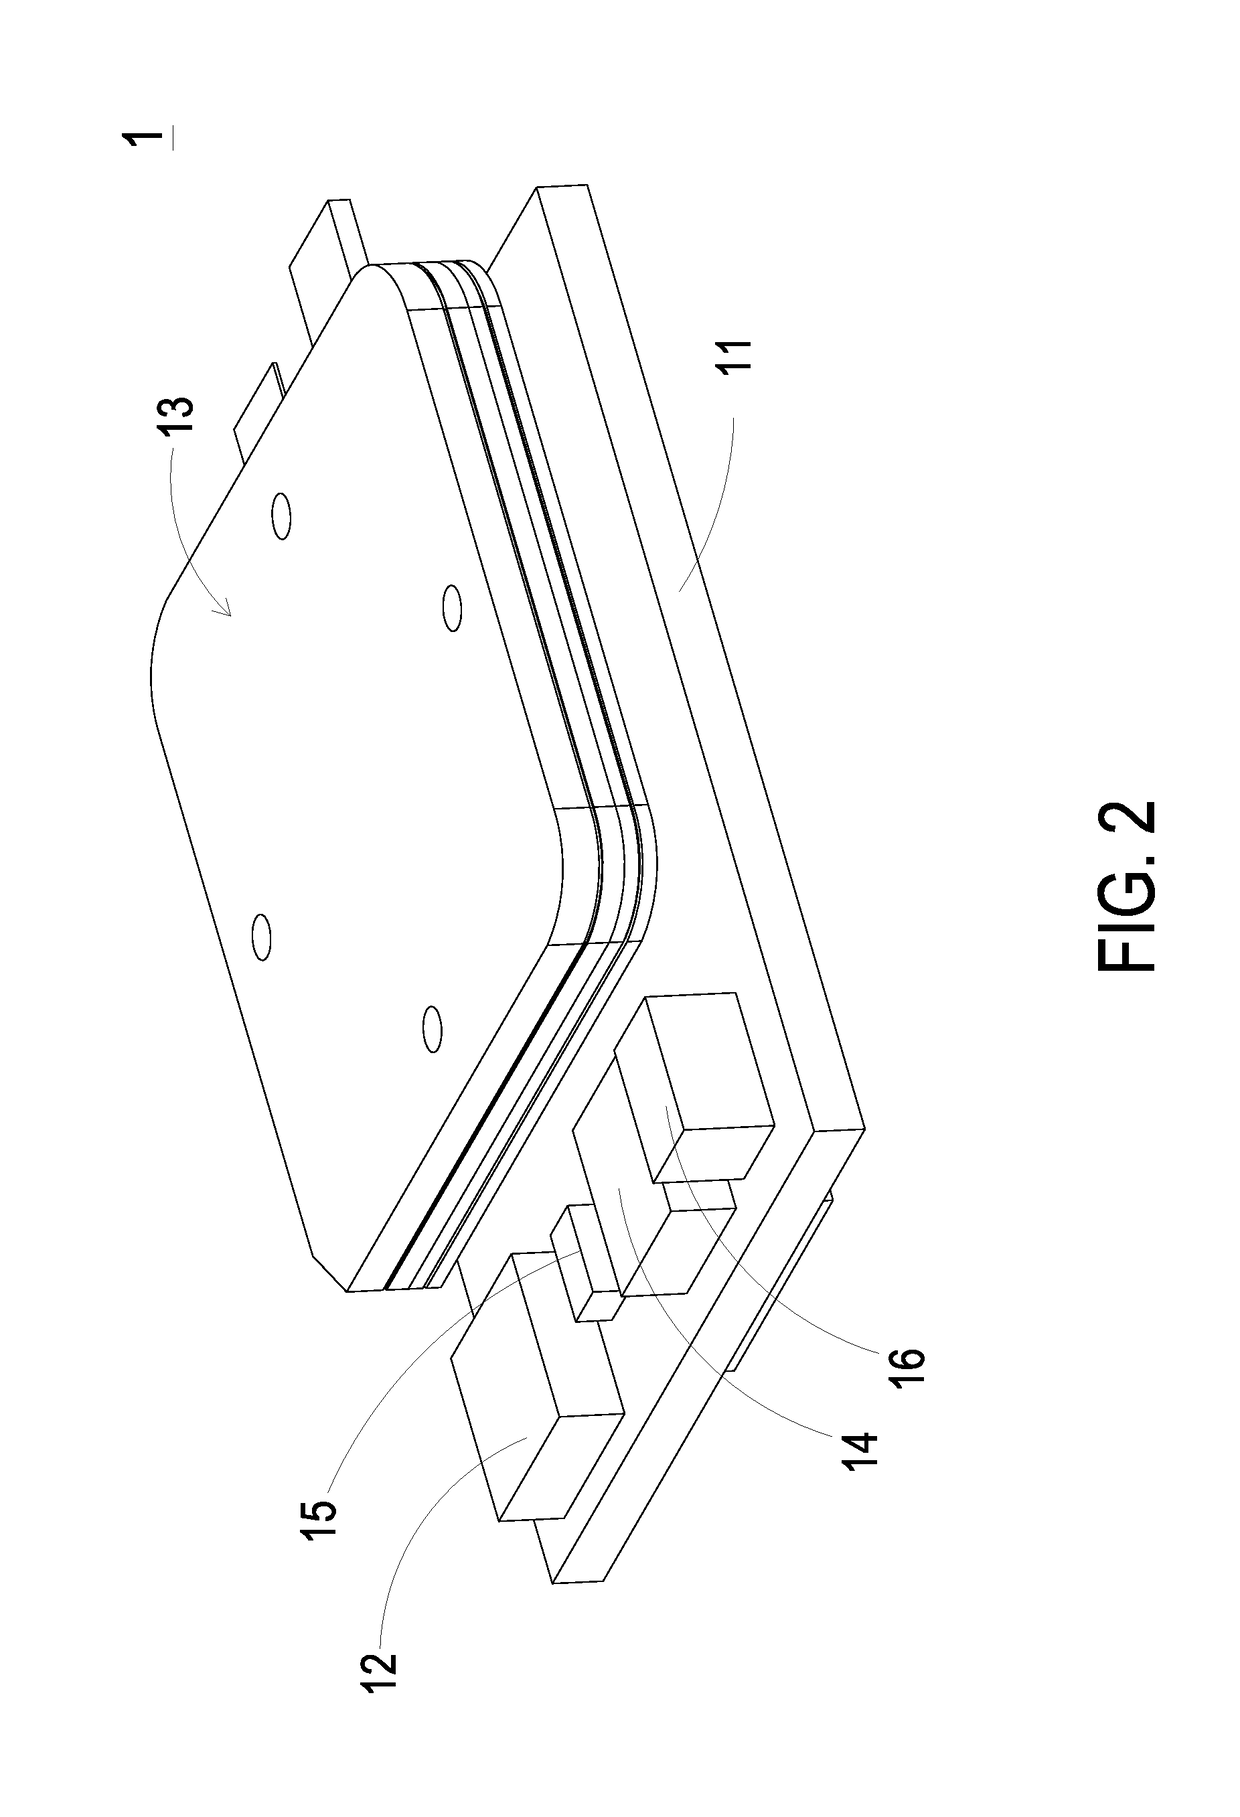 Driving system for actuating and sensing module